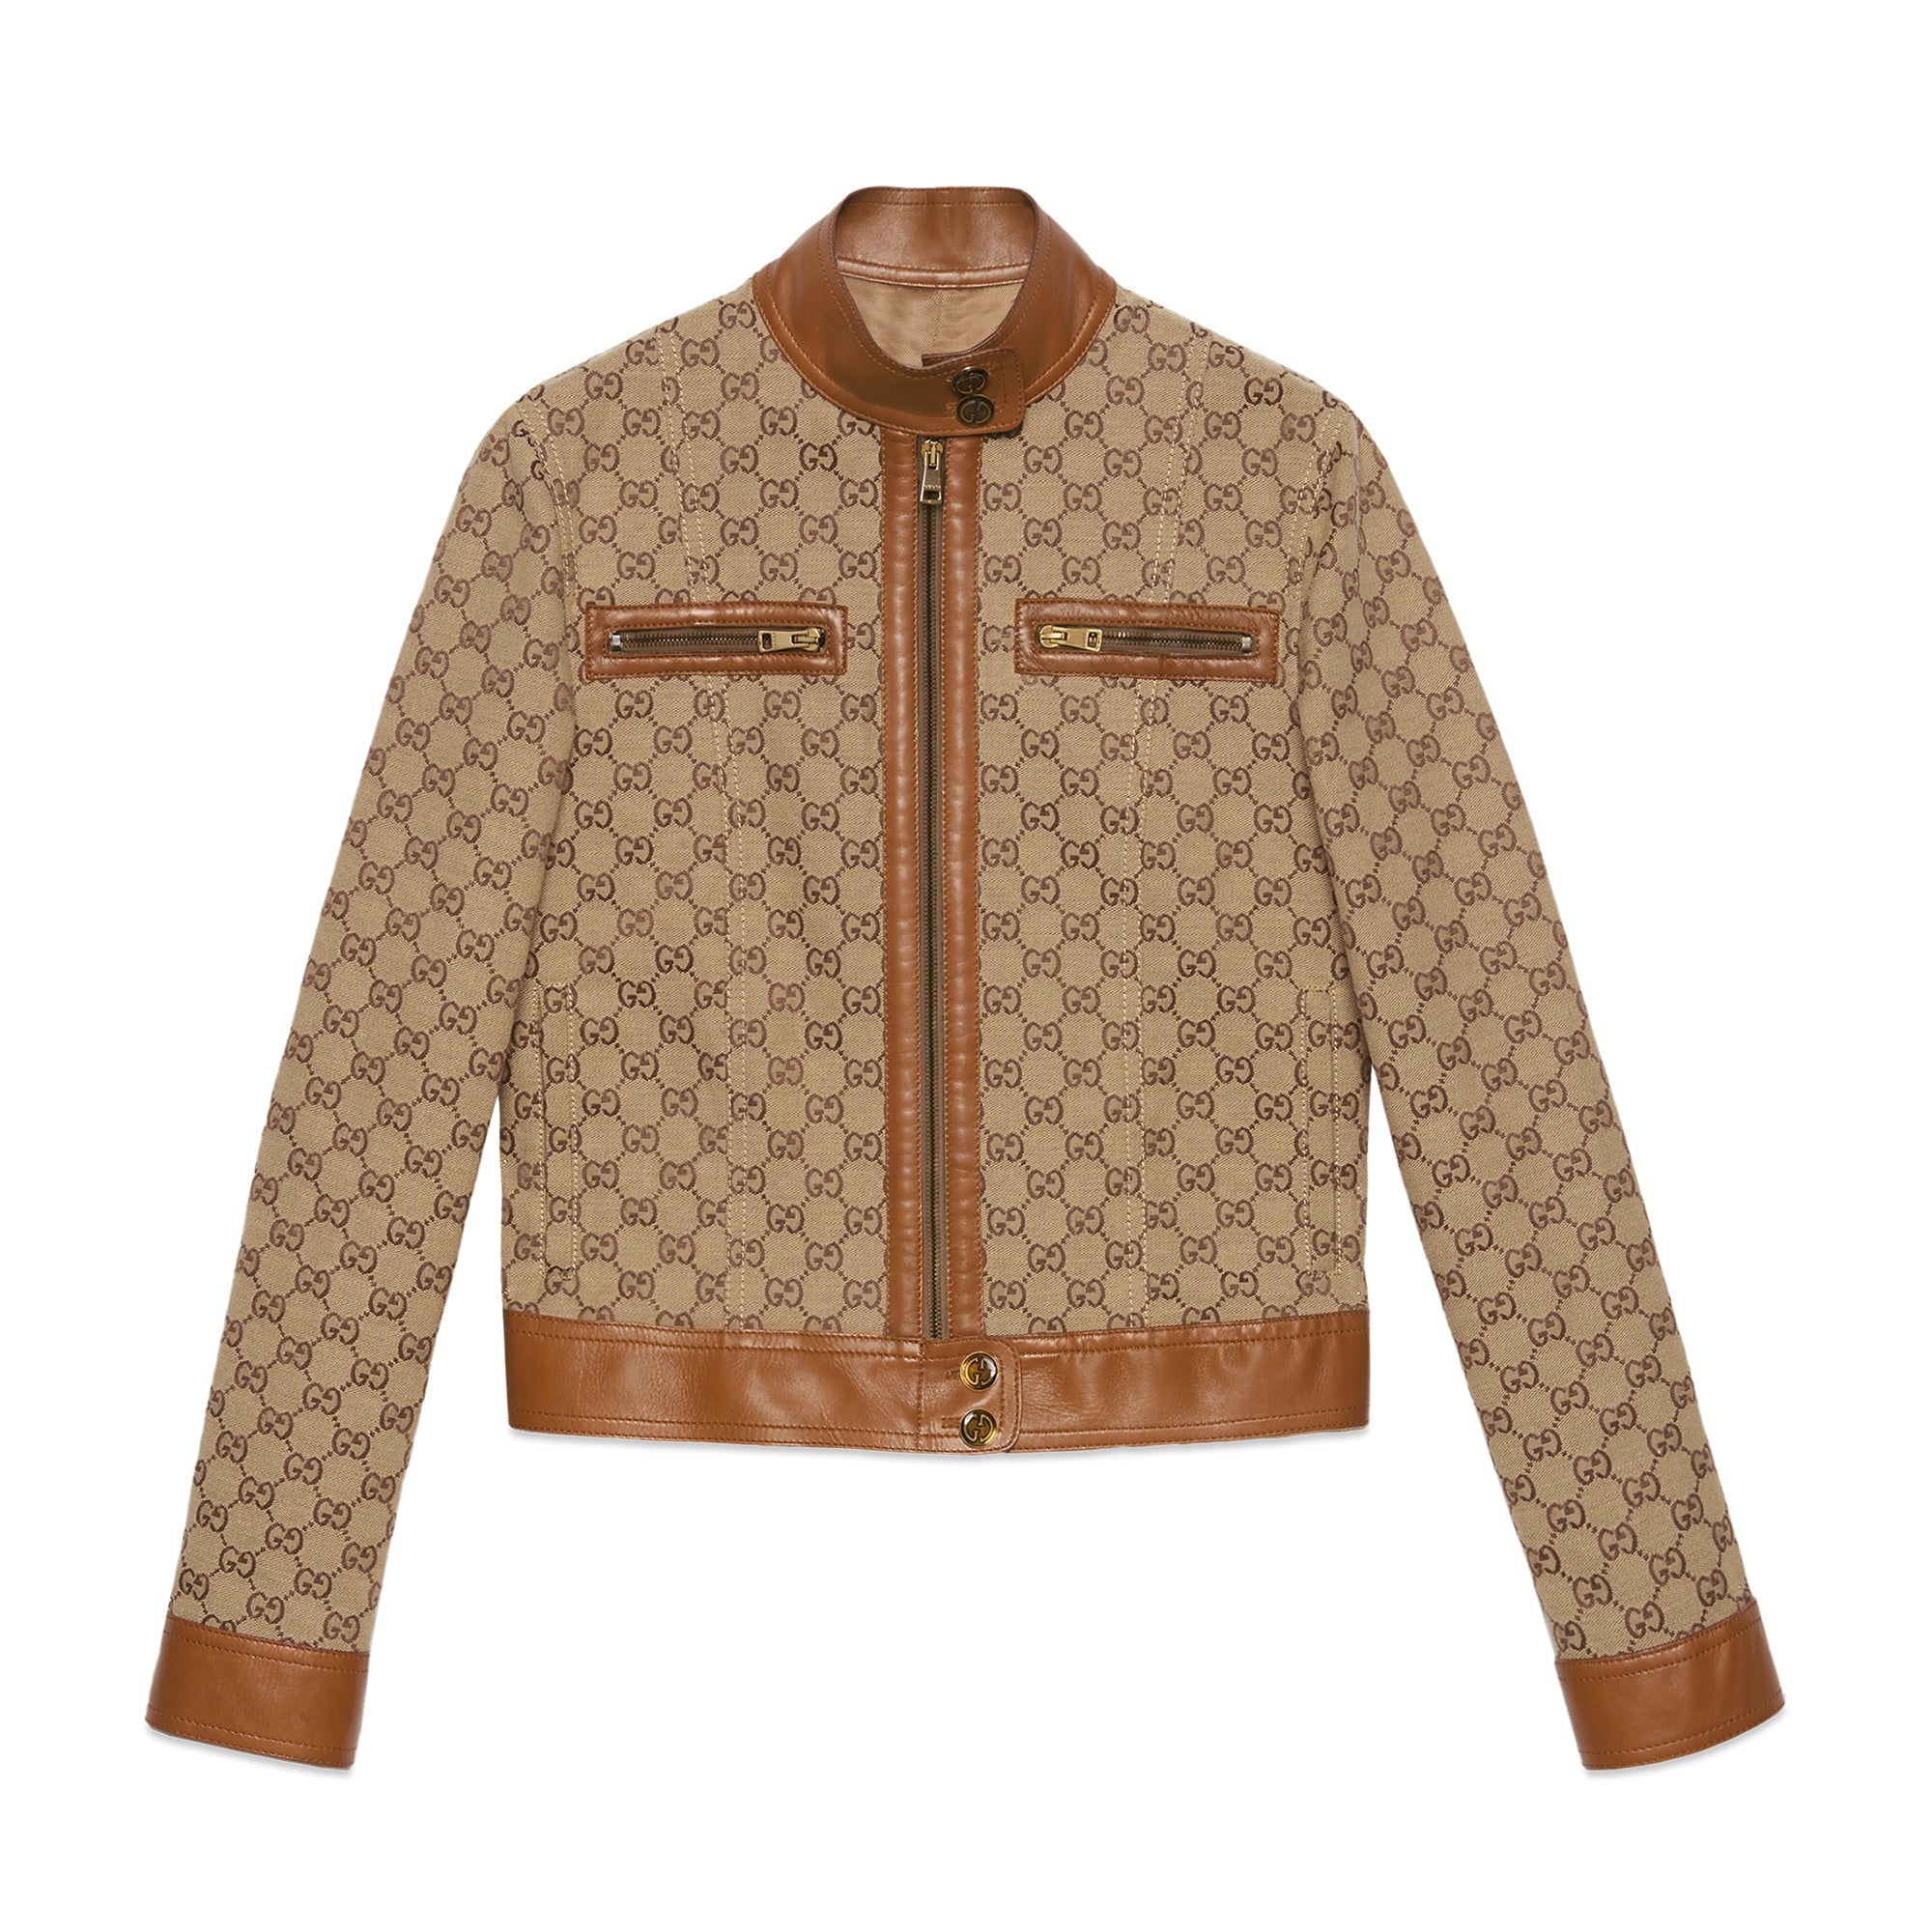 Beige Classic Gucci Inspired Jacket for Dogs and Cats